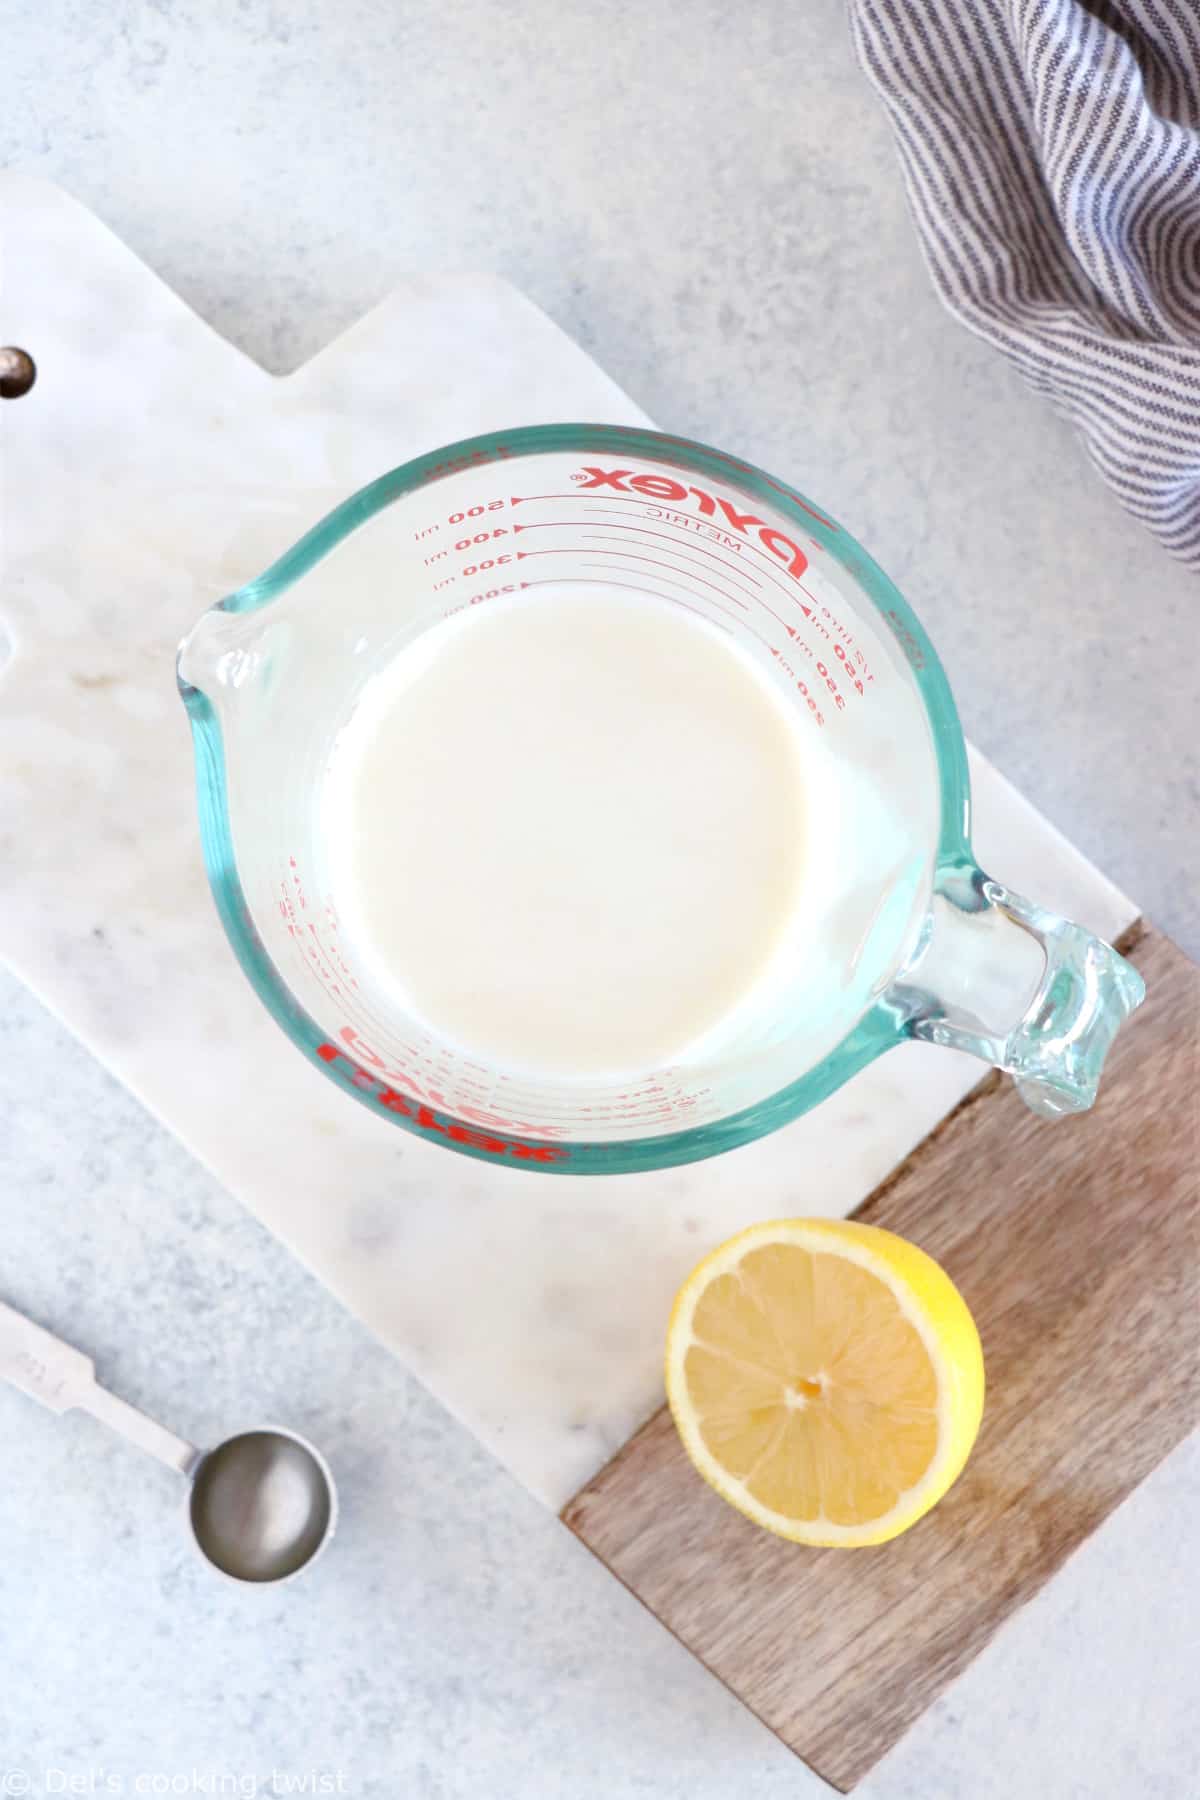 Ever wanted to know how to make homemade buttermilk at home? This 2-ingredient recipe is quick, easy, and works every single time!